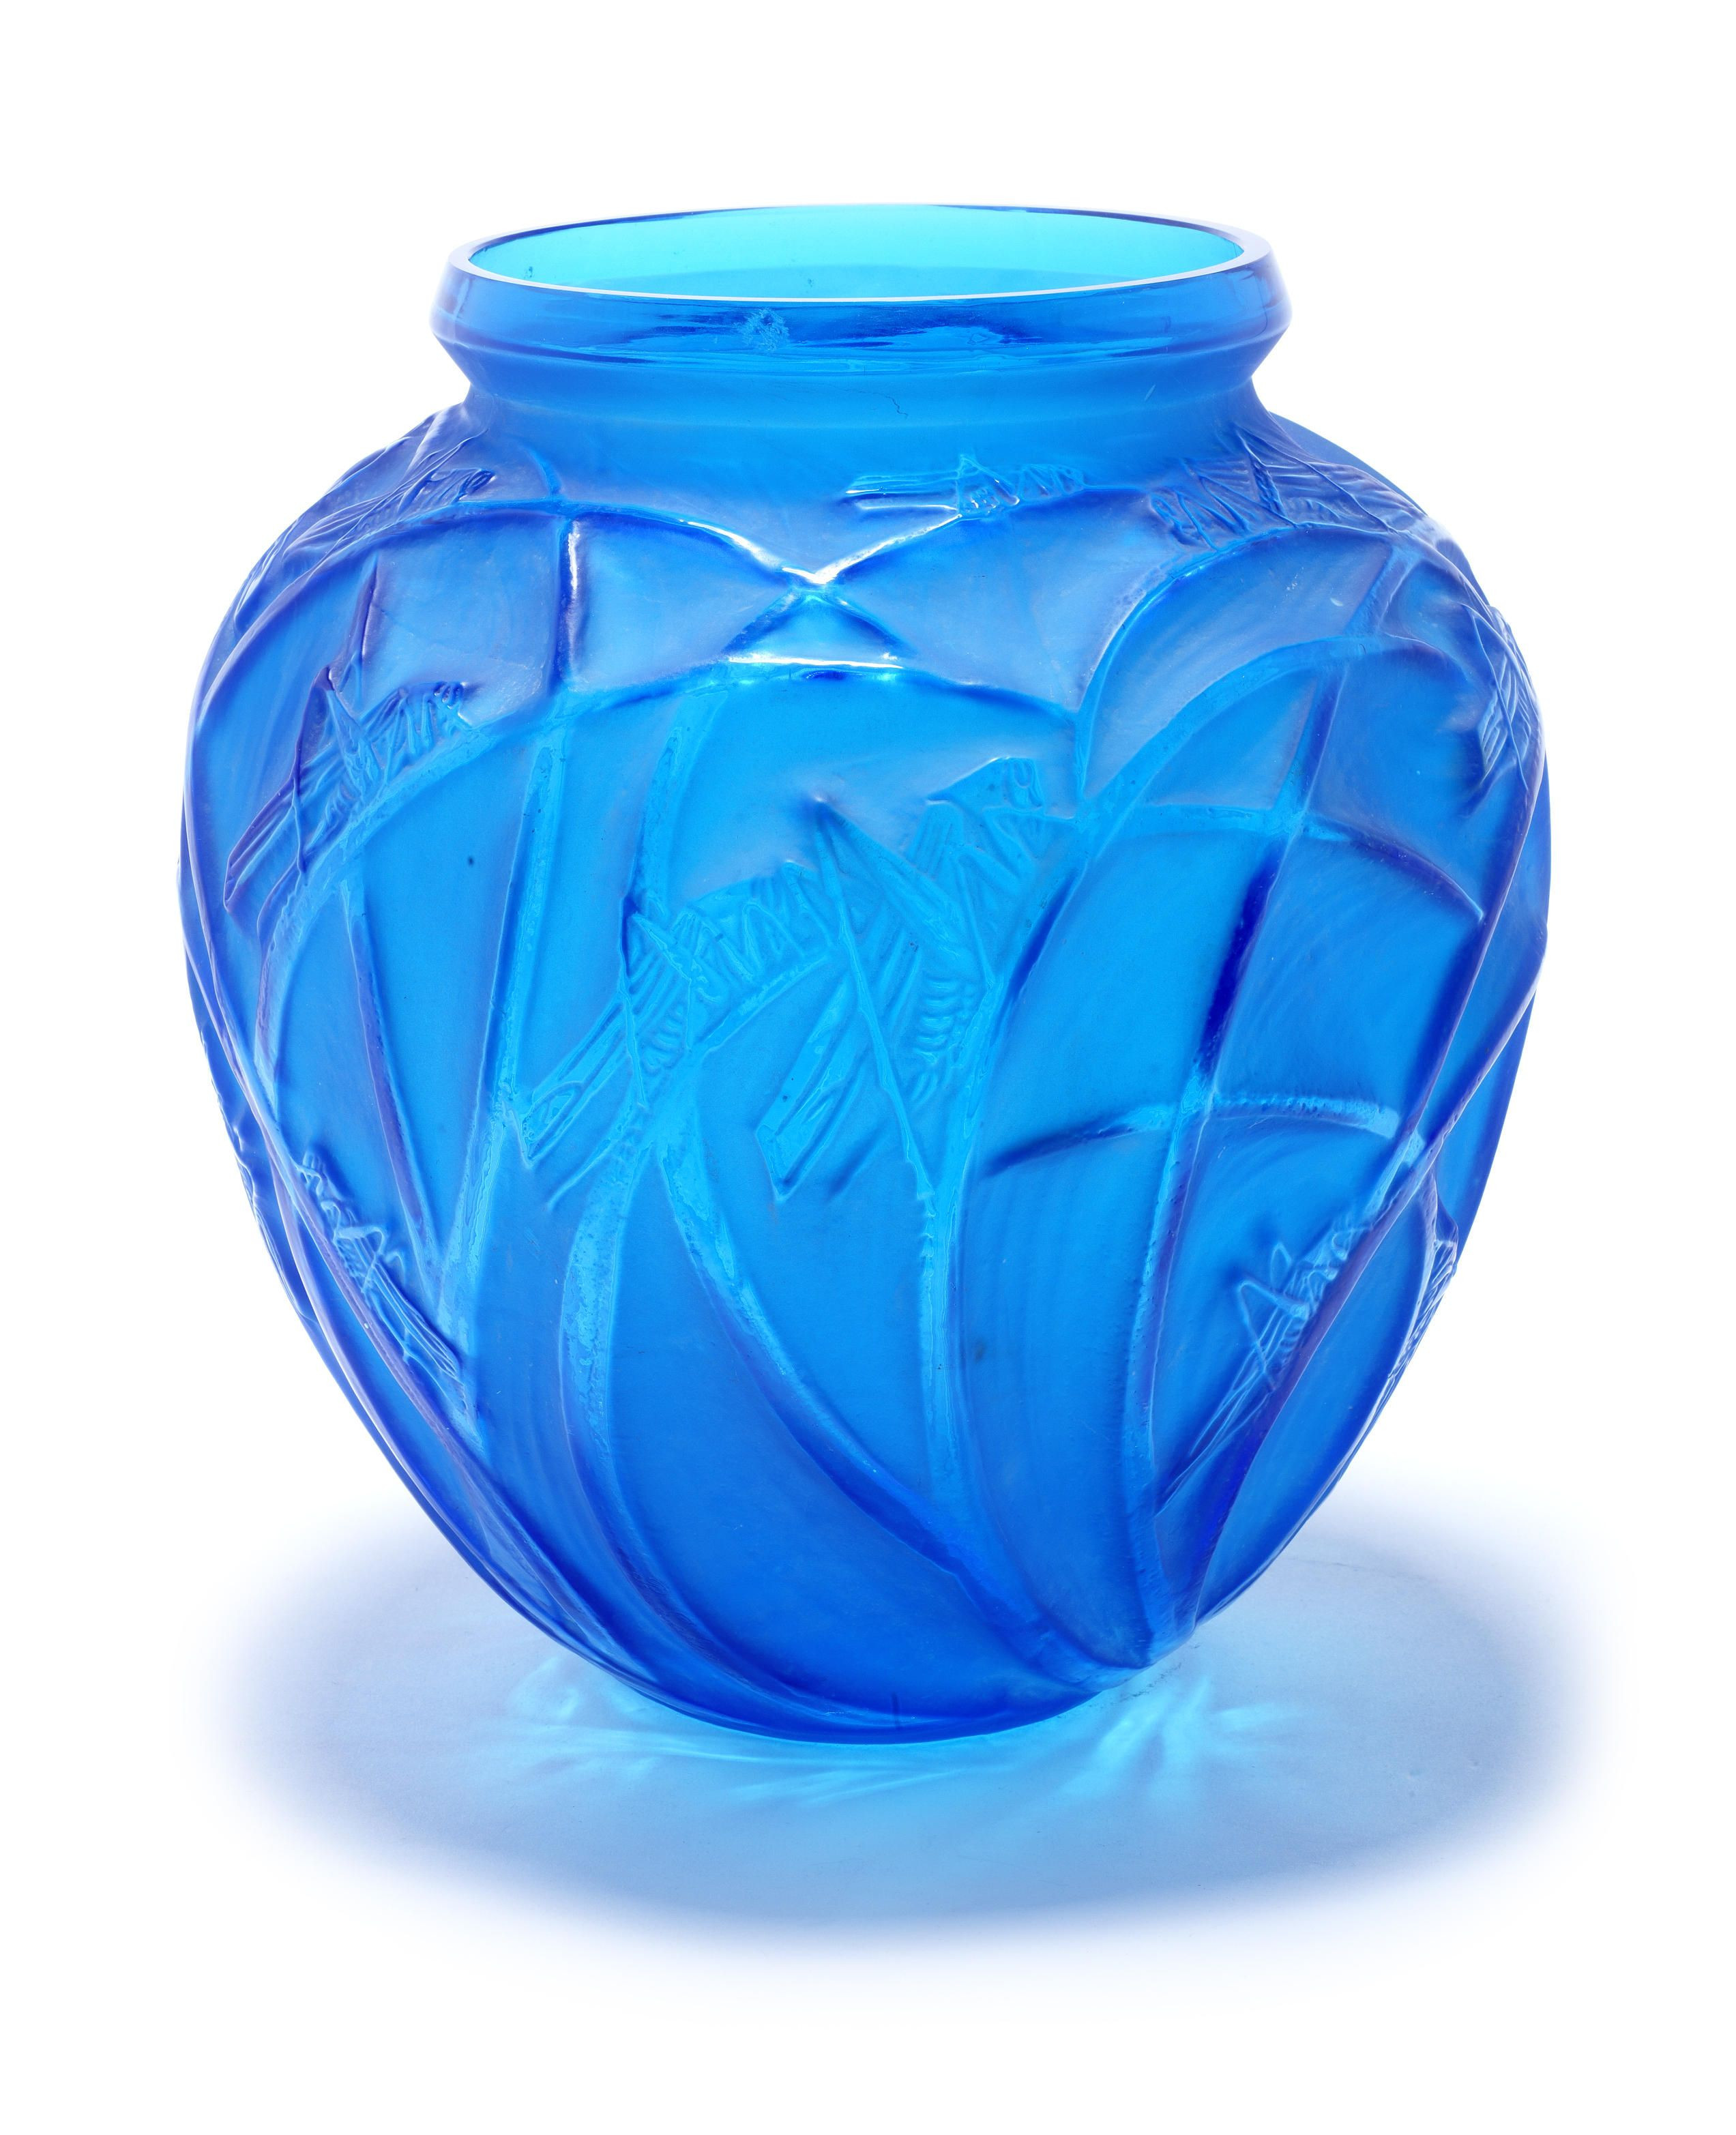 13 Ideal Clear Blue Glass Vases 2024 free download clear blue glass vases of rena lalique sauterelles a vase design 1913 electric blue glass pertaining to glass art